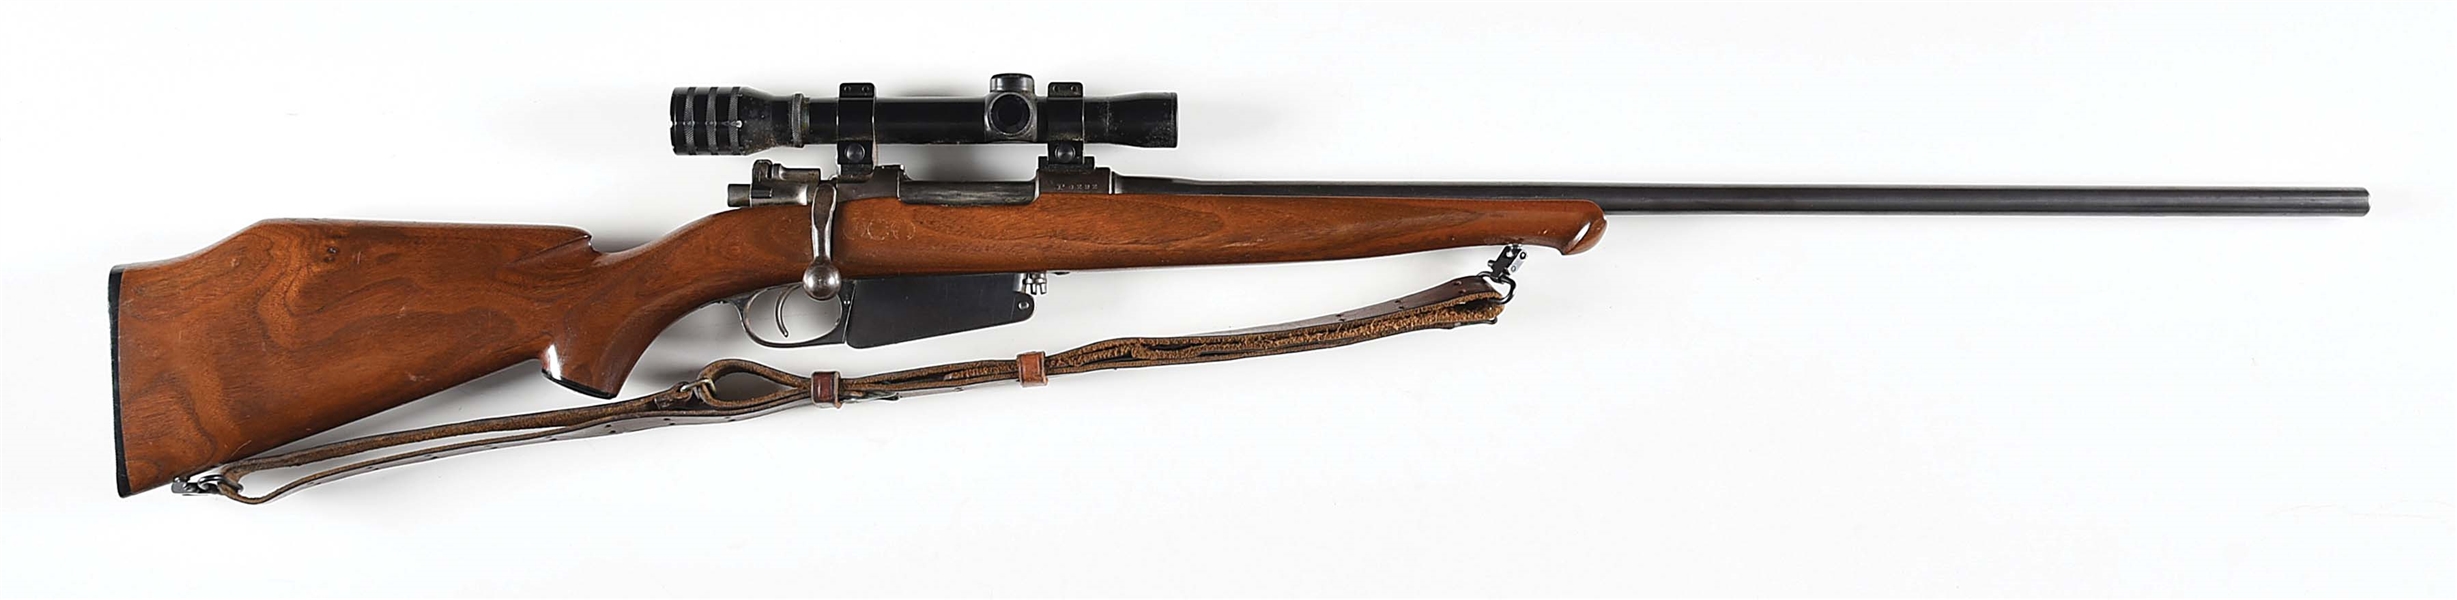 (A) SPORTERIZED LOEWE M1891 ARGENTINO MAUSER BOLT ACTION RIFLE.